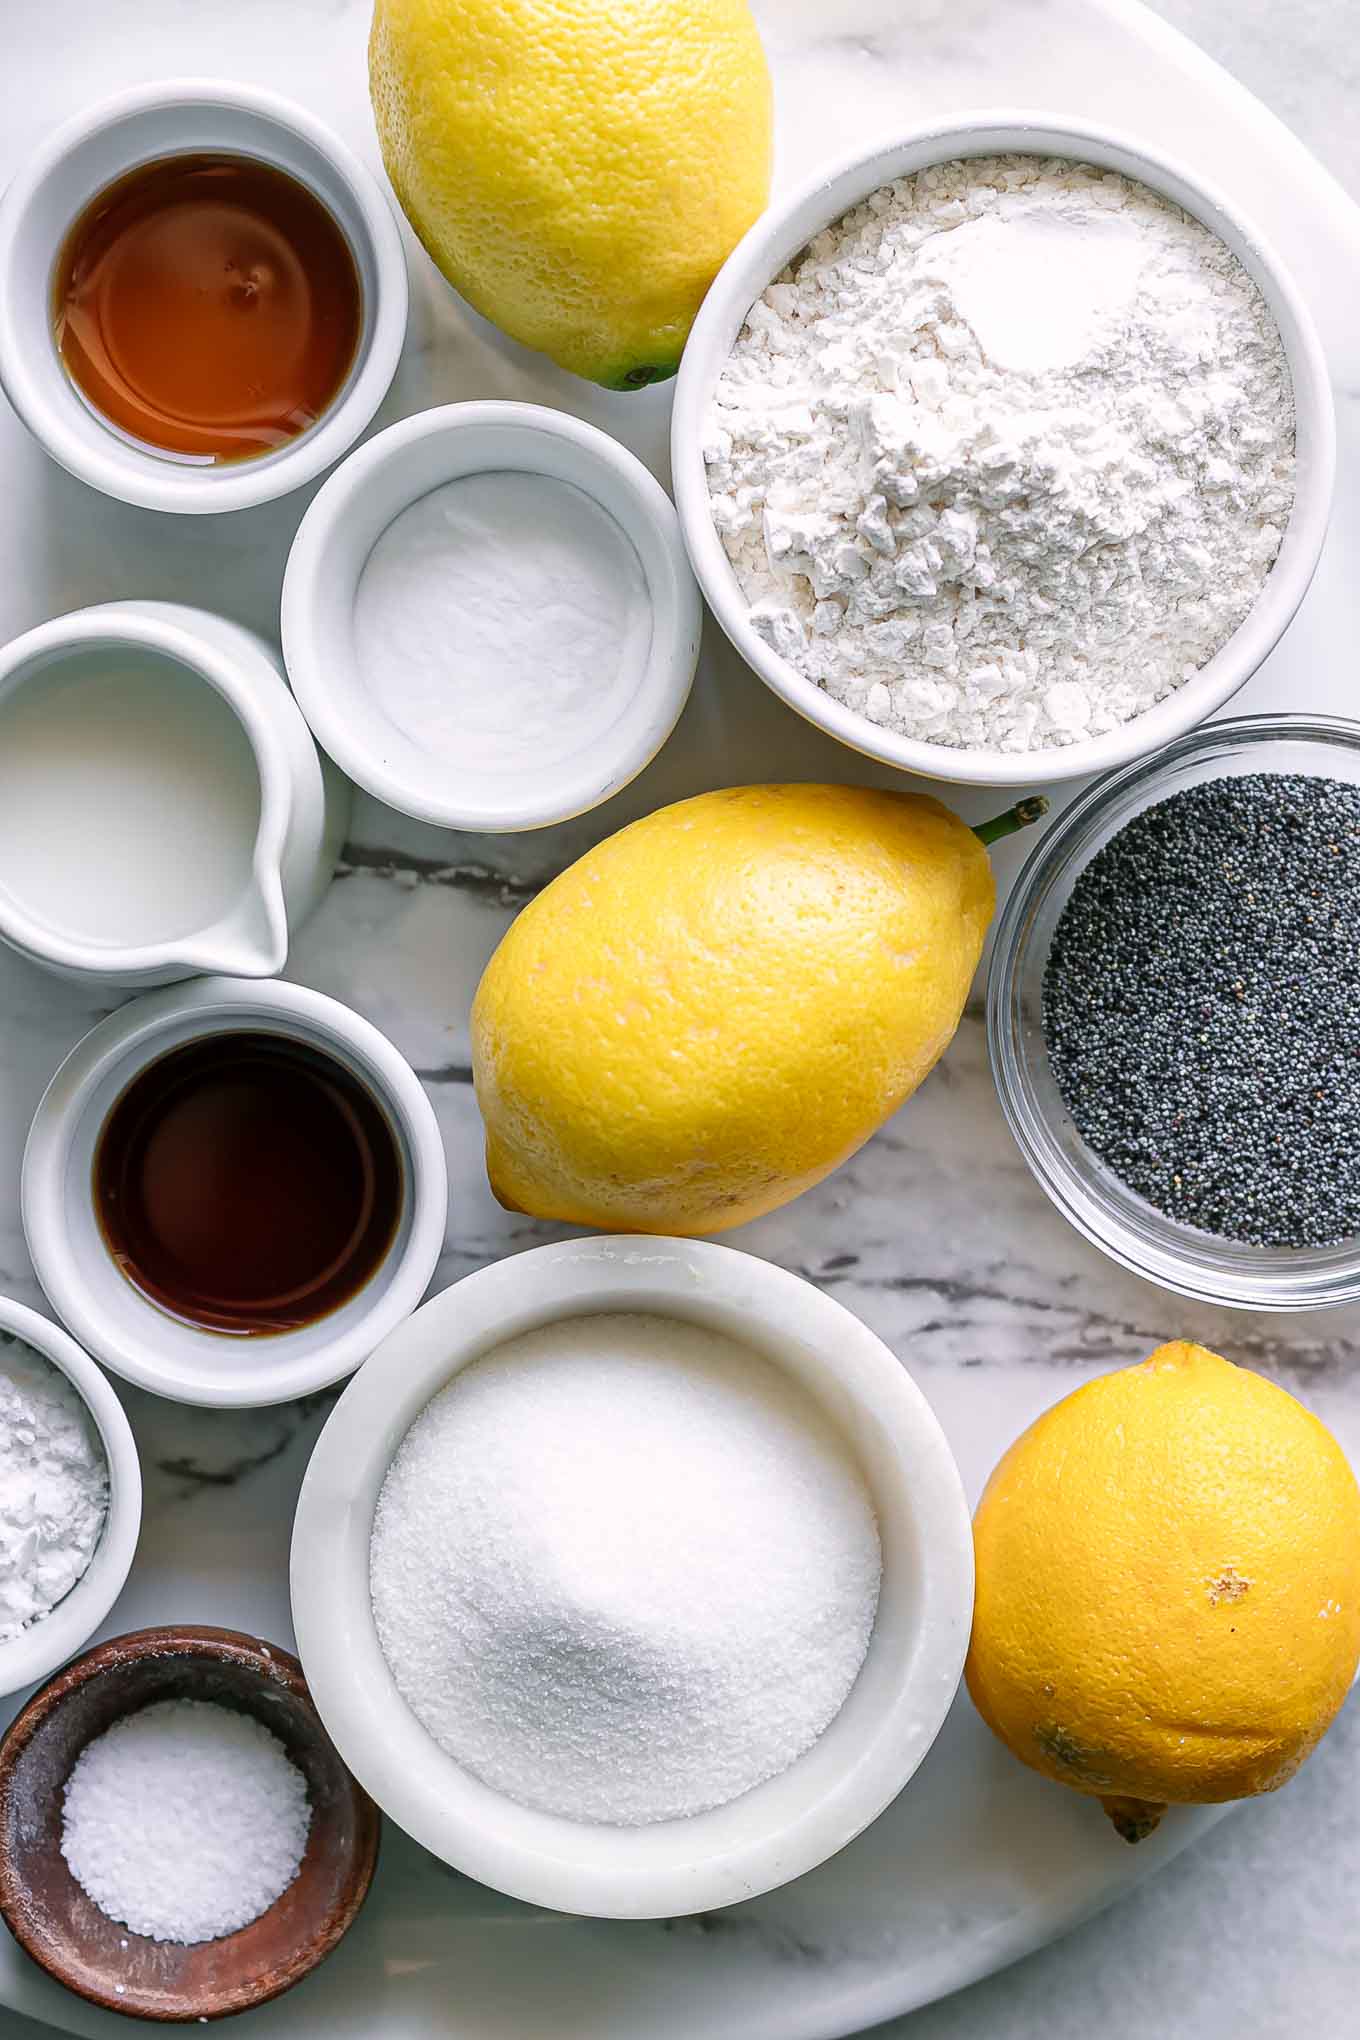 bowls of flour, sugar, lemons, poppyseeds, and other ingredients for pancakes on a white table